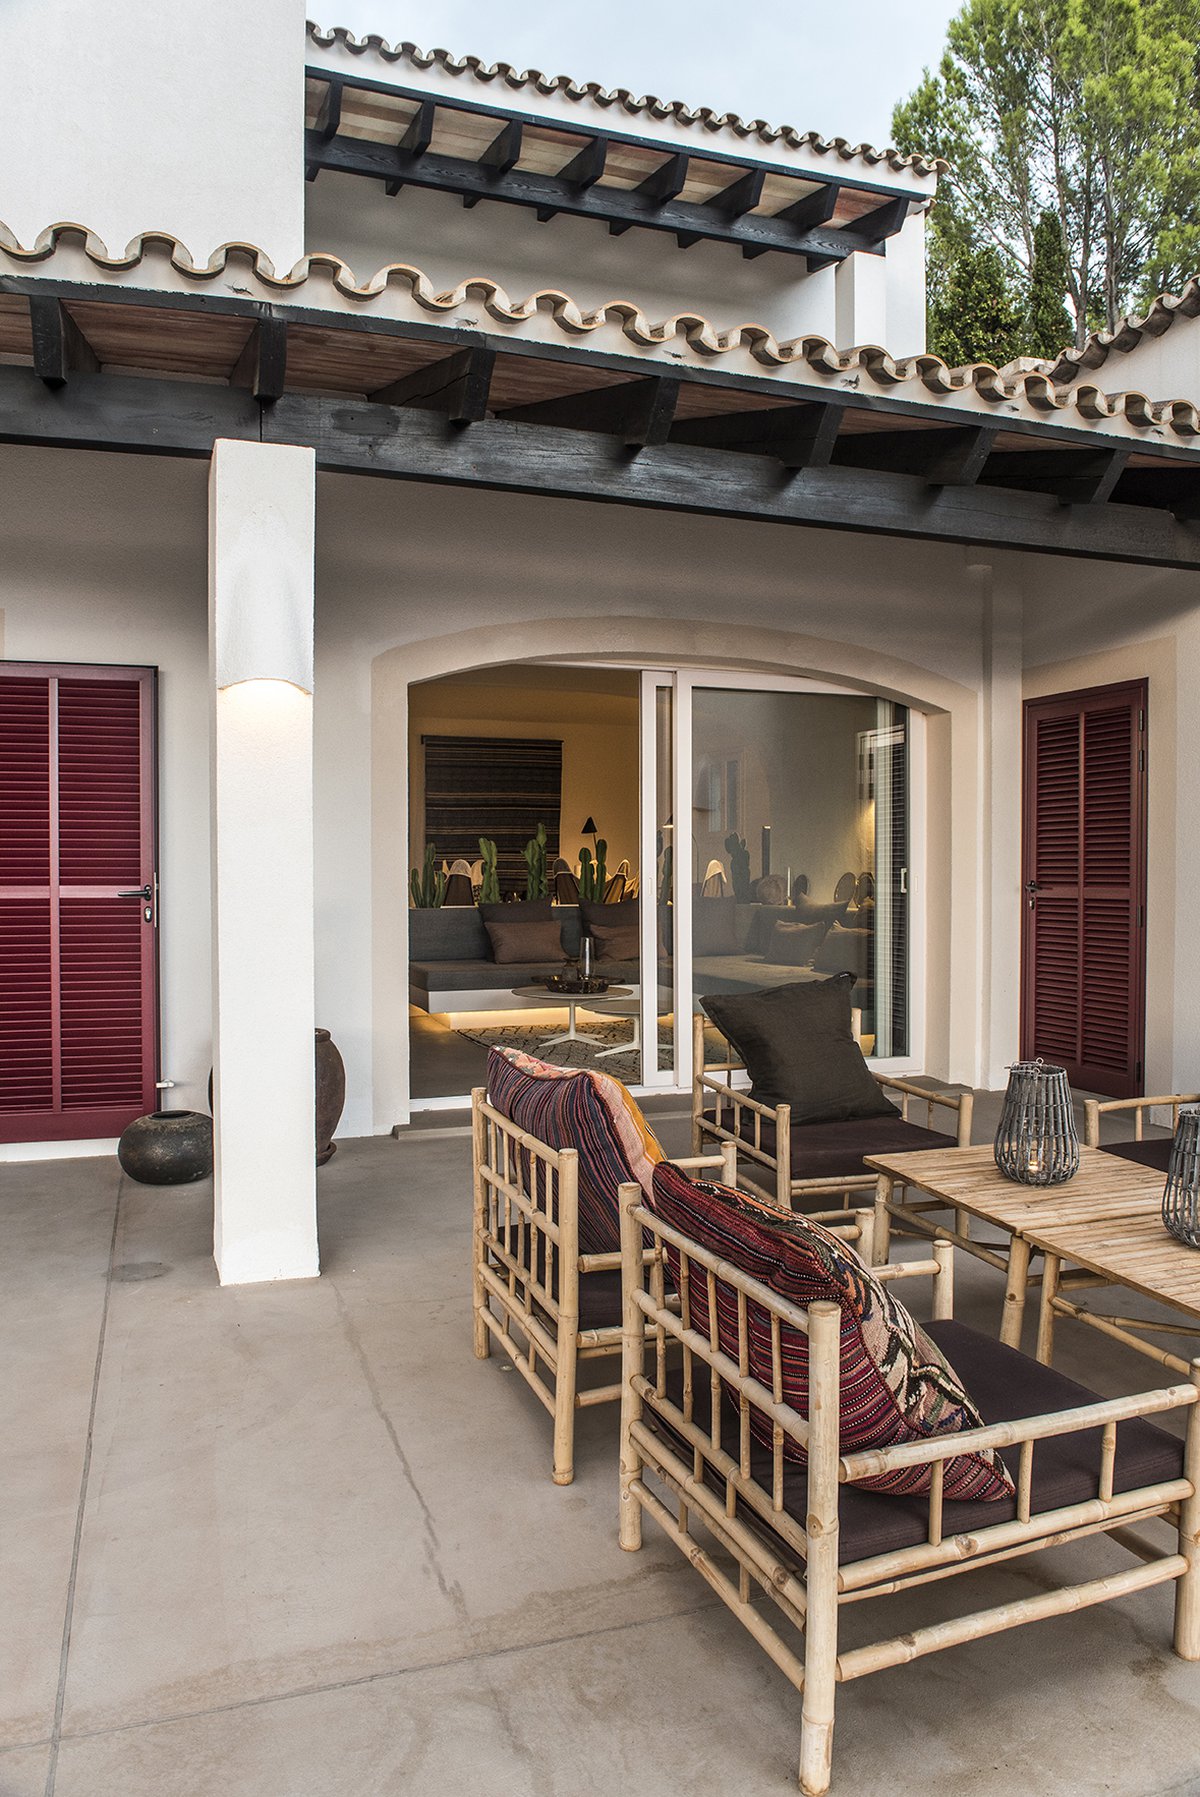 Vila Son Font is a beautiful rental home in Mallorca furnished with bamboo tables and chairs.